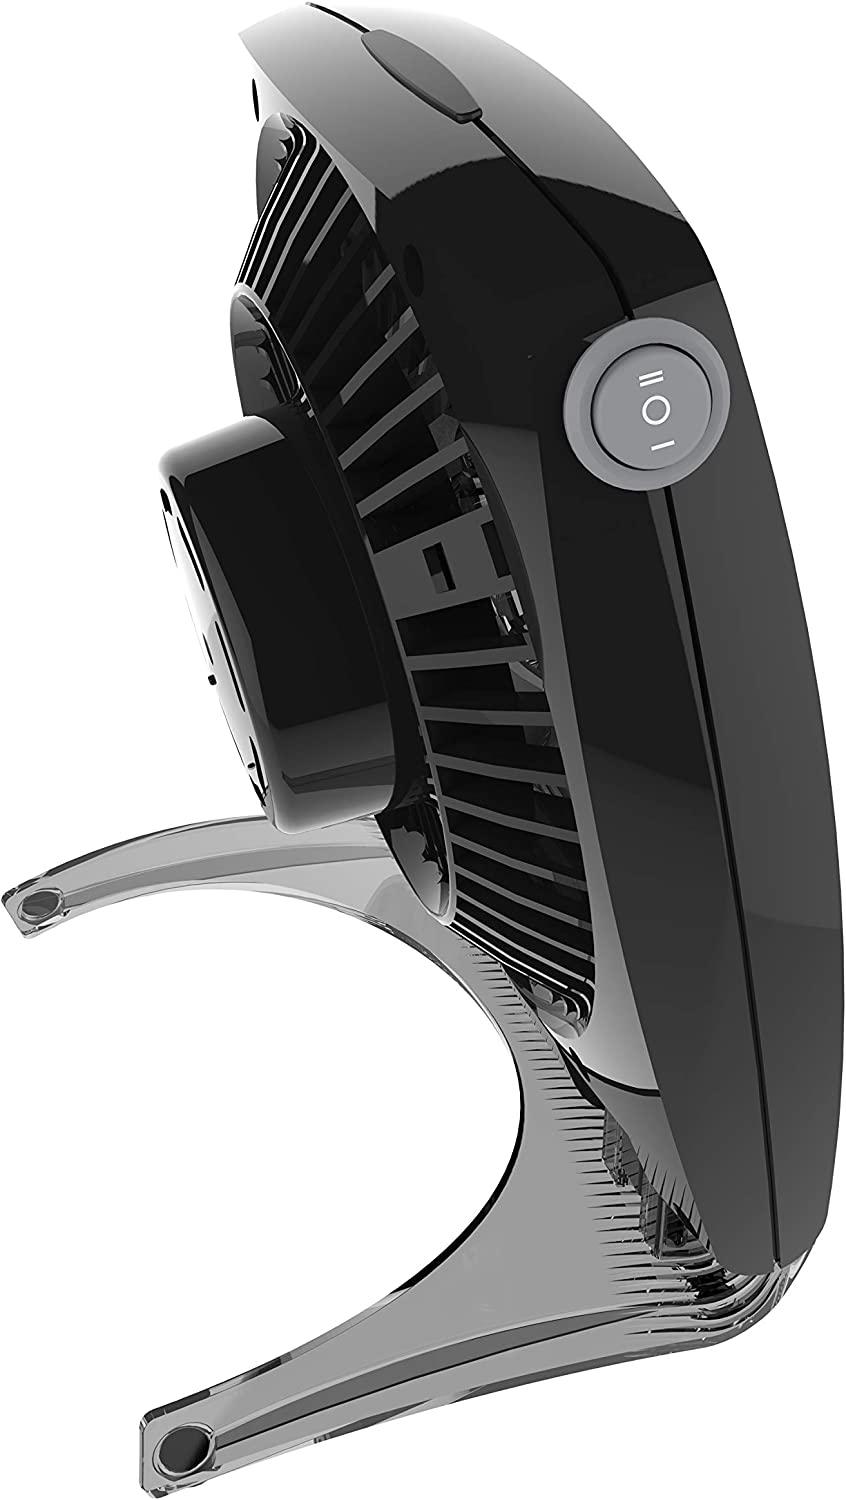 Vornado FIT Personal Air Circulator Fan with Fold-Up Design